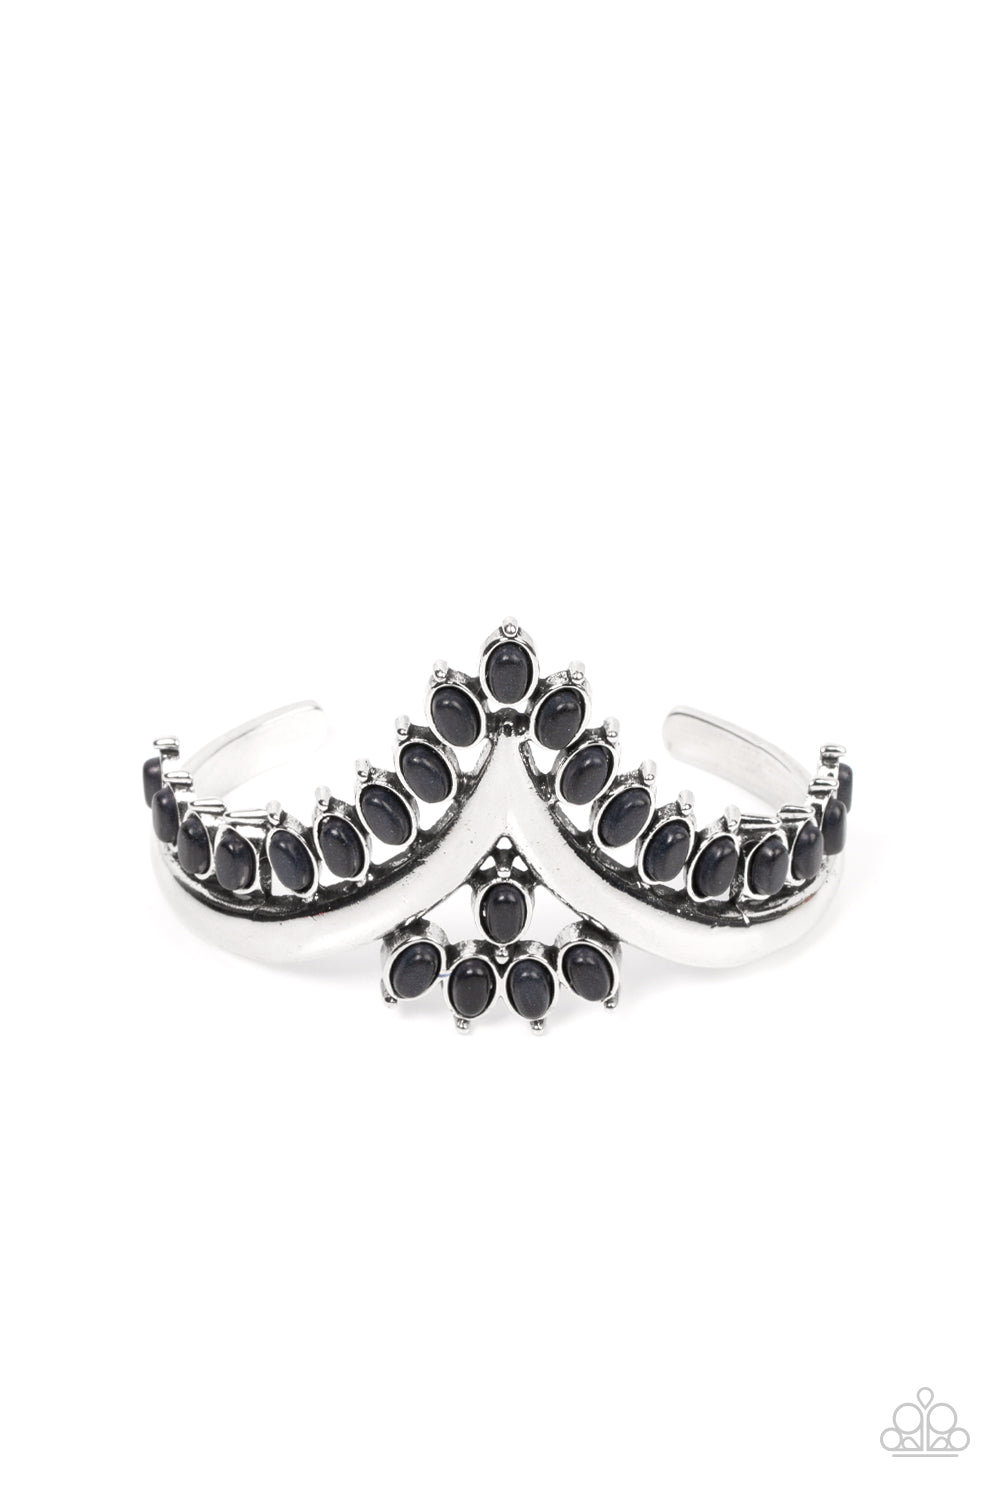 Black oval stones, encased in studded silver frames, line the edge of a daring V-shaped silver cuff. A gathering of black stones adorns the center of the bracelet, adding a finishing touch to the rustically regal cuff.  Sold as one individual bracelet.